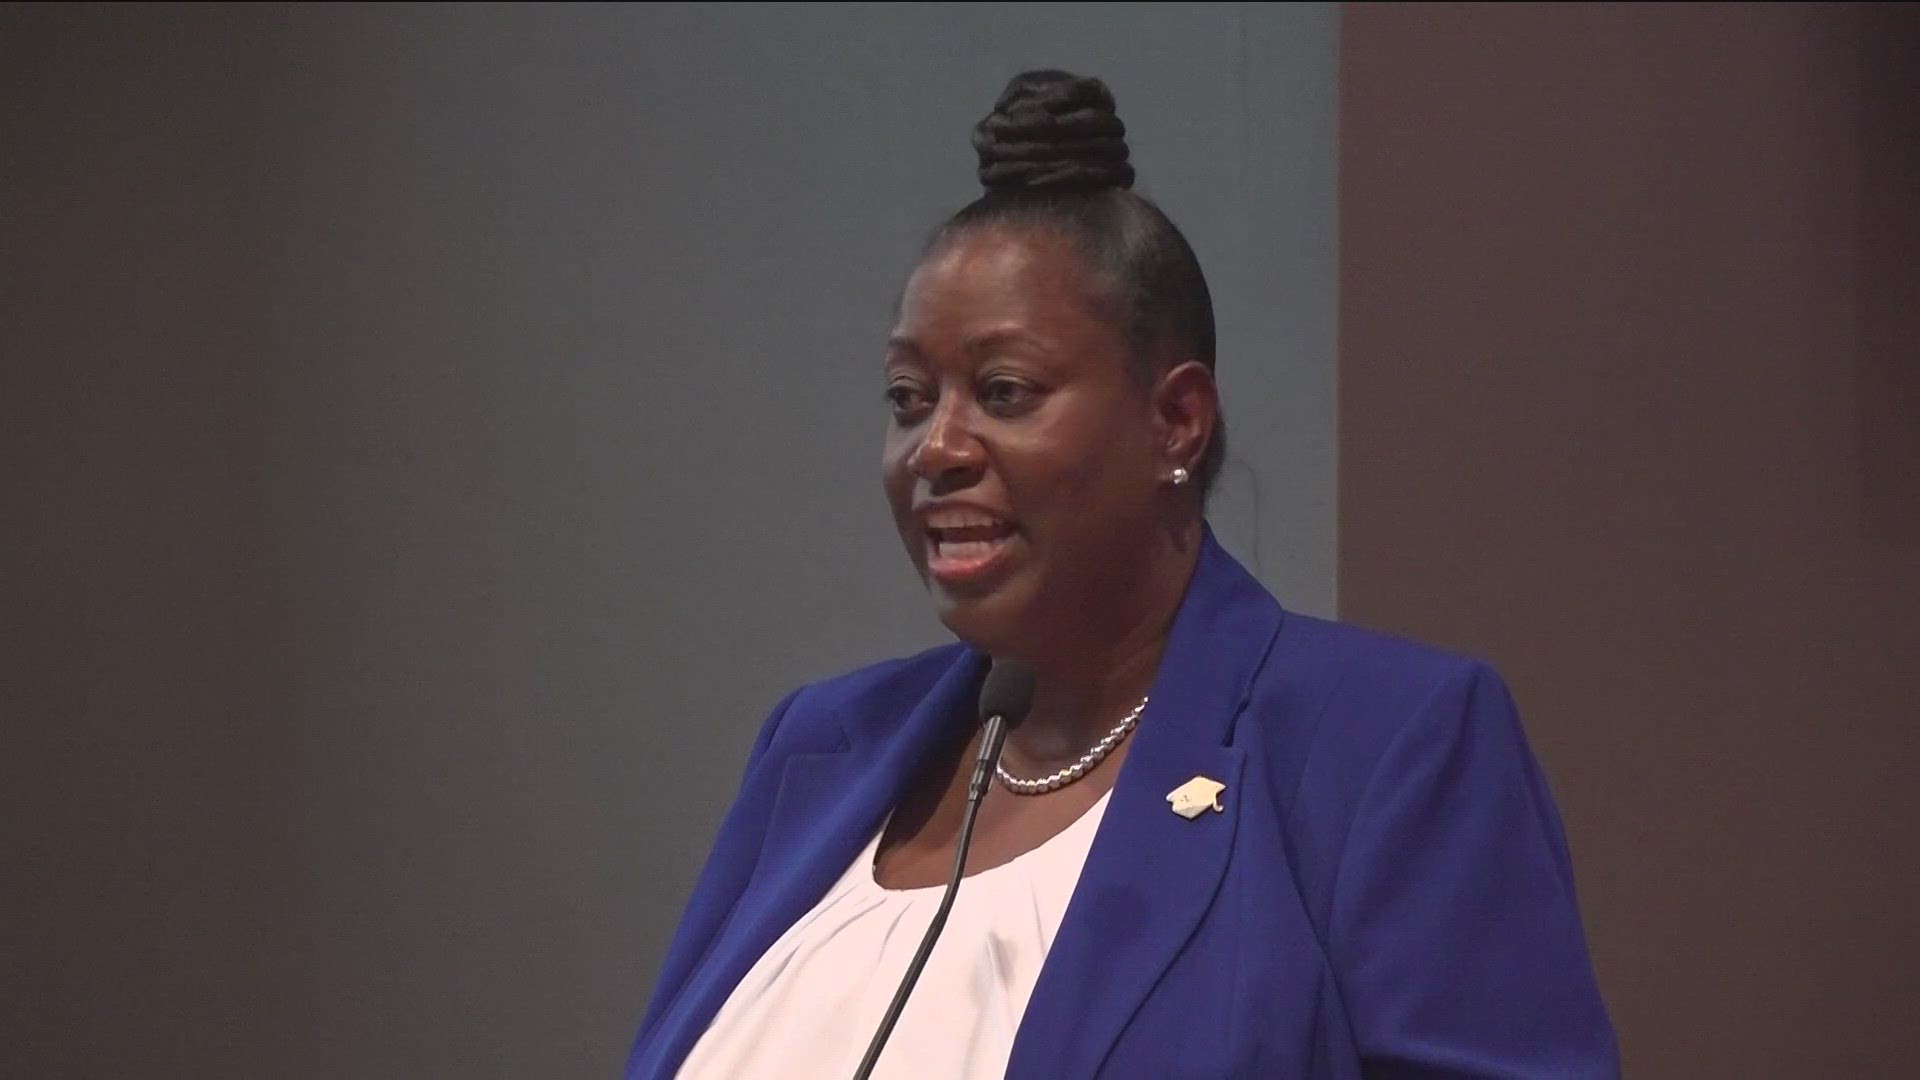 The school board added that the Dr. Danielle Battle will lead daily operations of the school system and continue working with the board for educational goals.